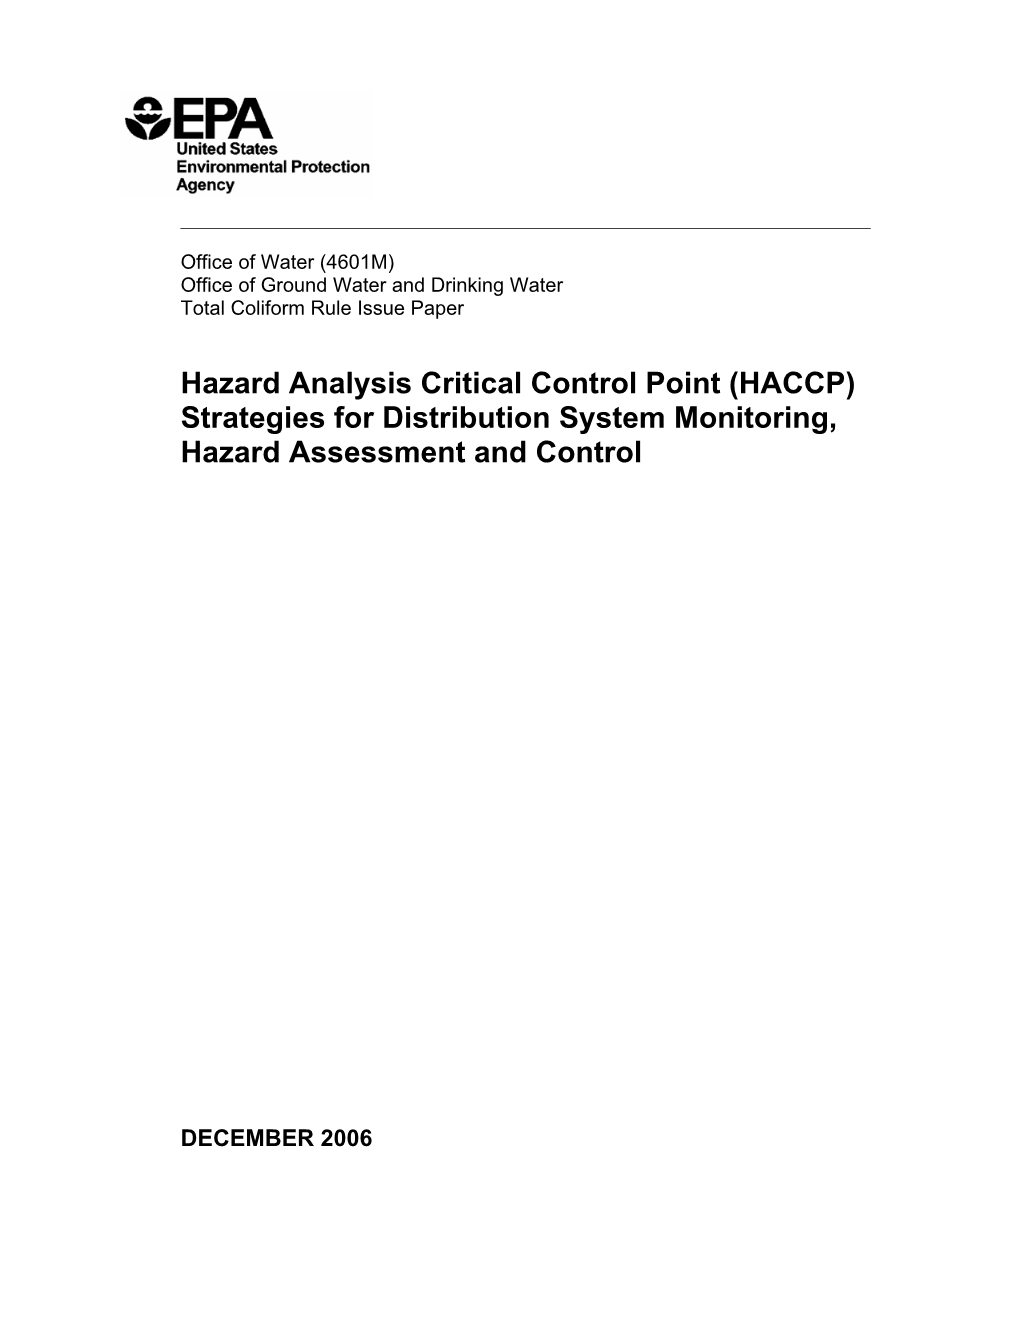 (HACCP) Strategies for Distribution System Monitoring, Hazard Assessment and Control